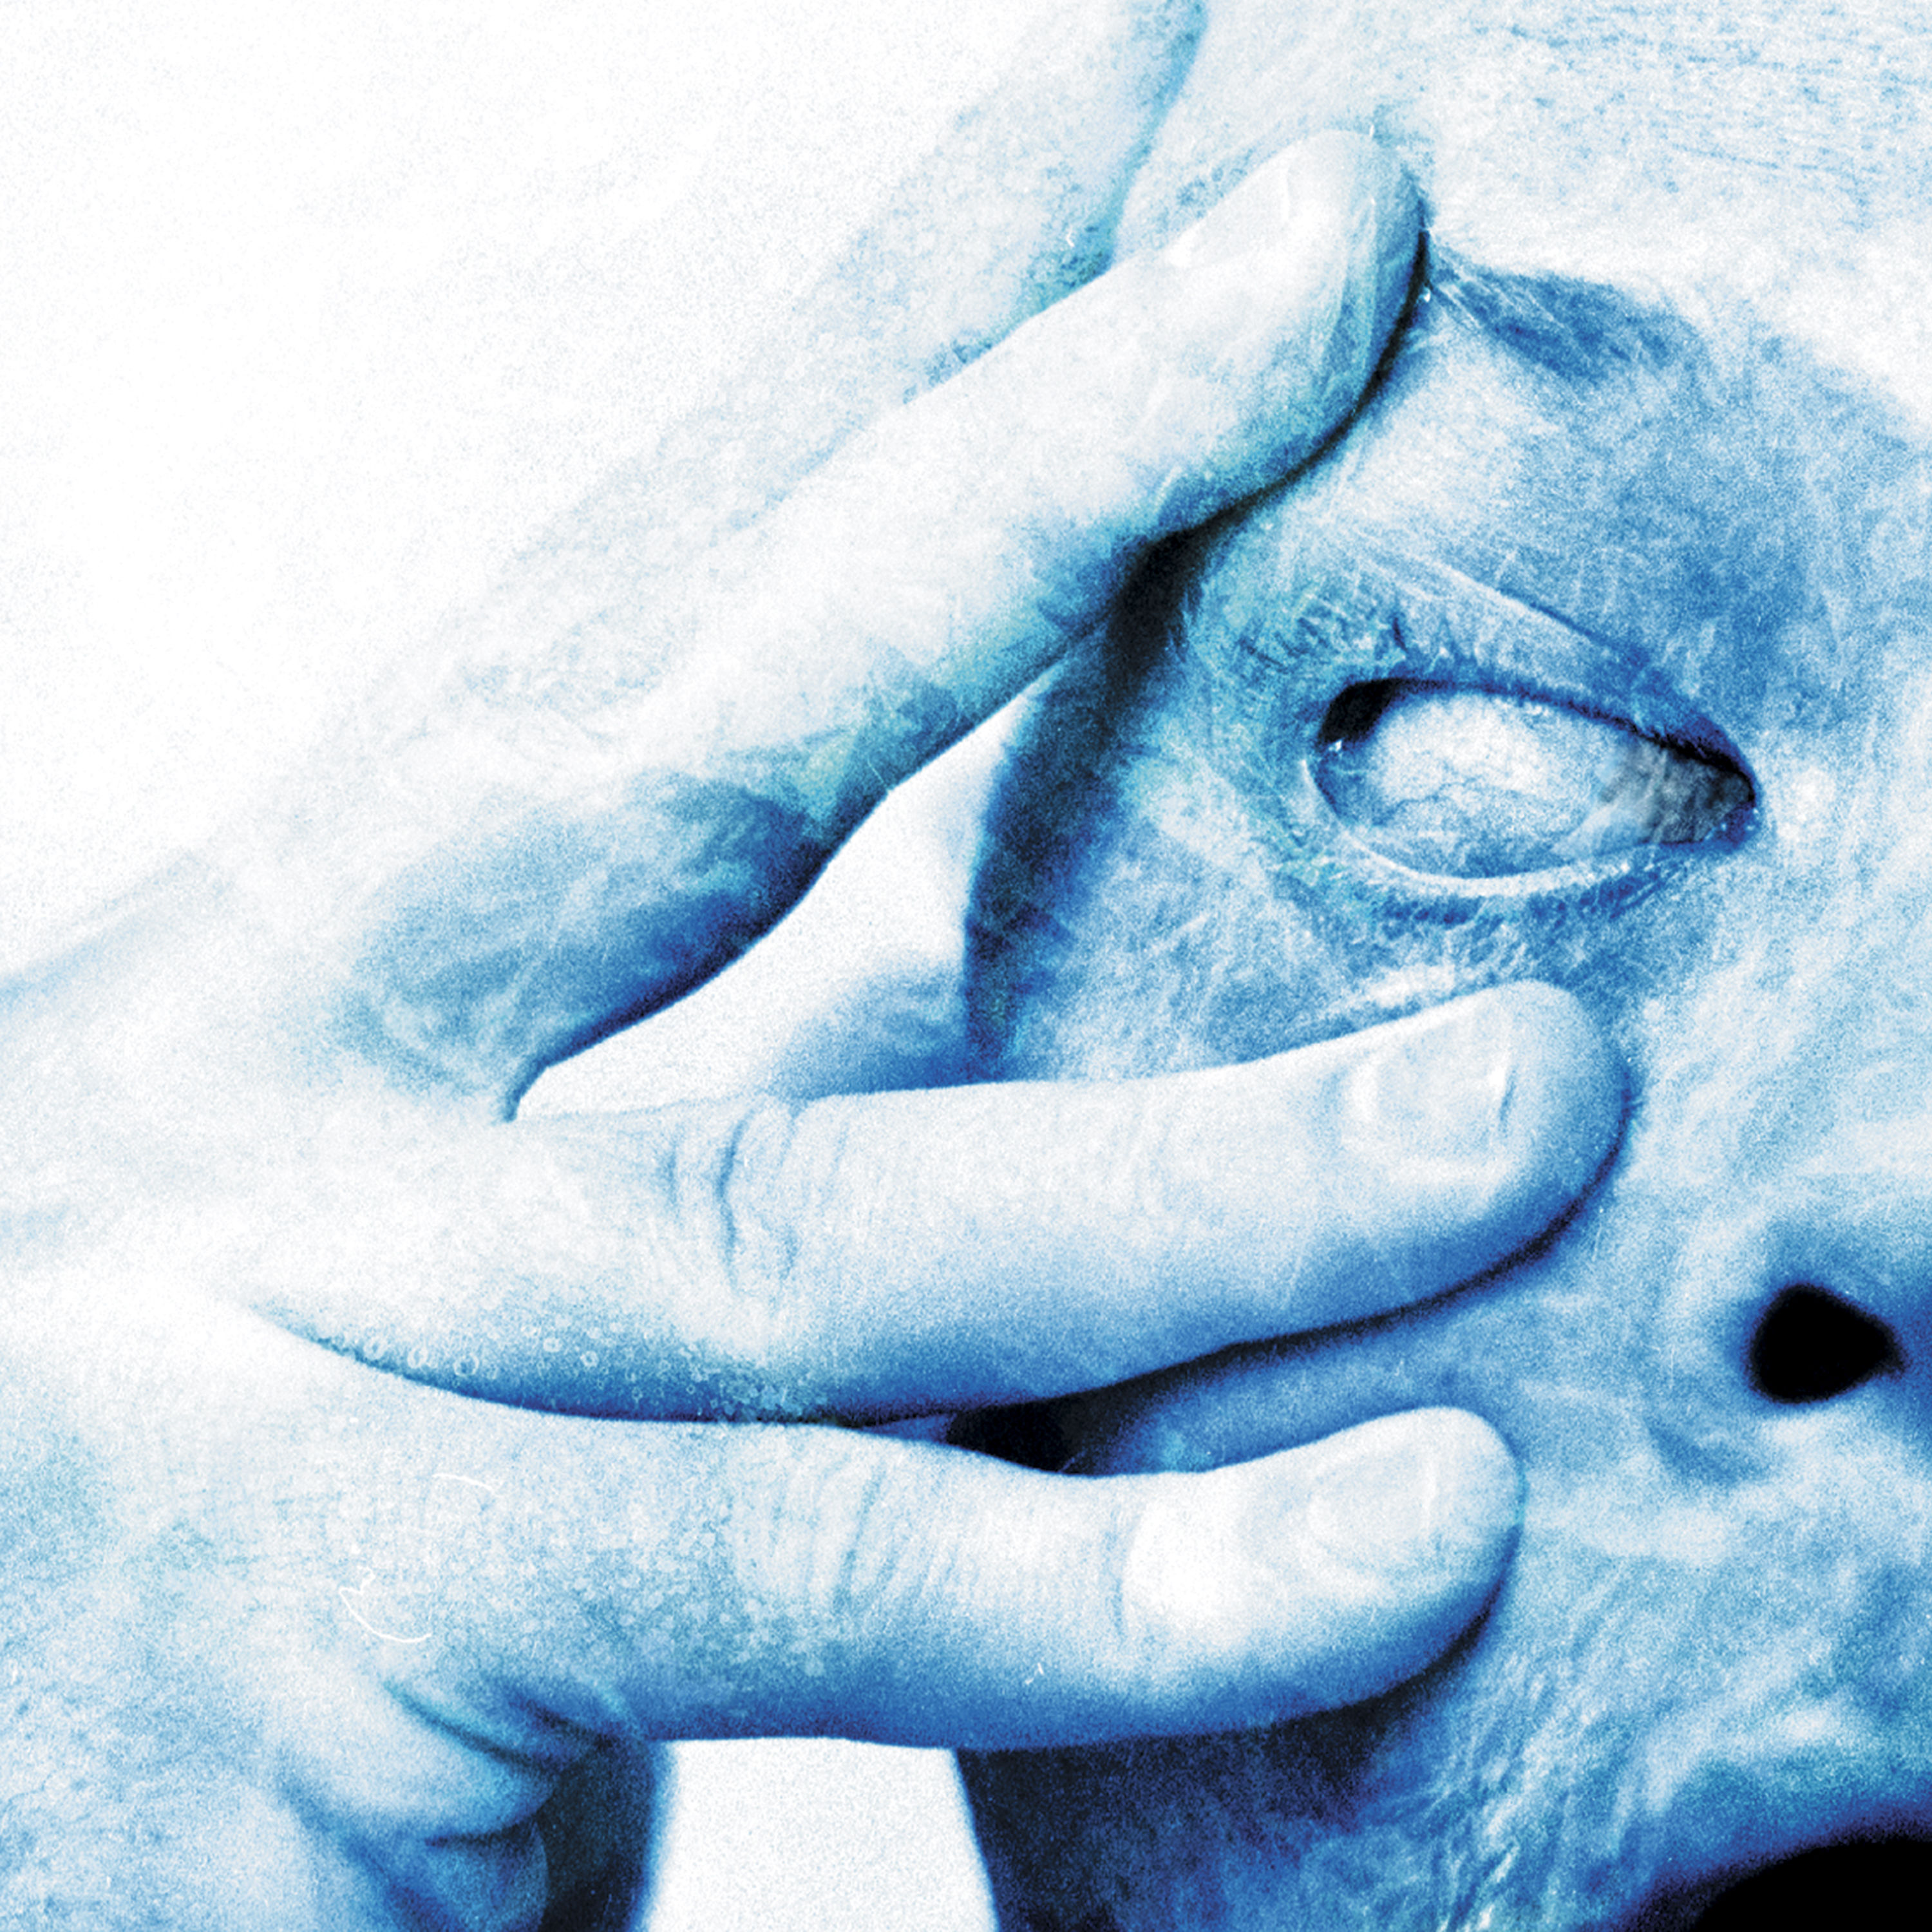 Porcupine Tree - In Absentia (Remastered) (2002/2020) [FLAC 24bit/96kHz]